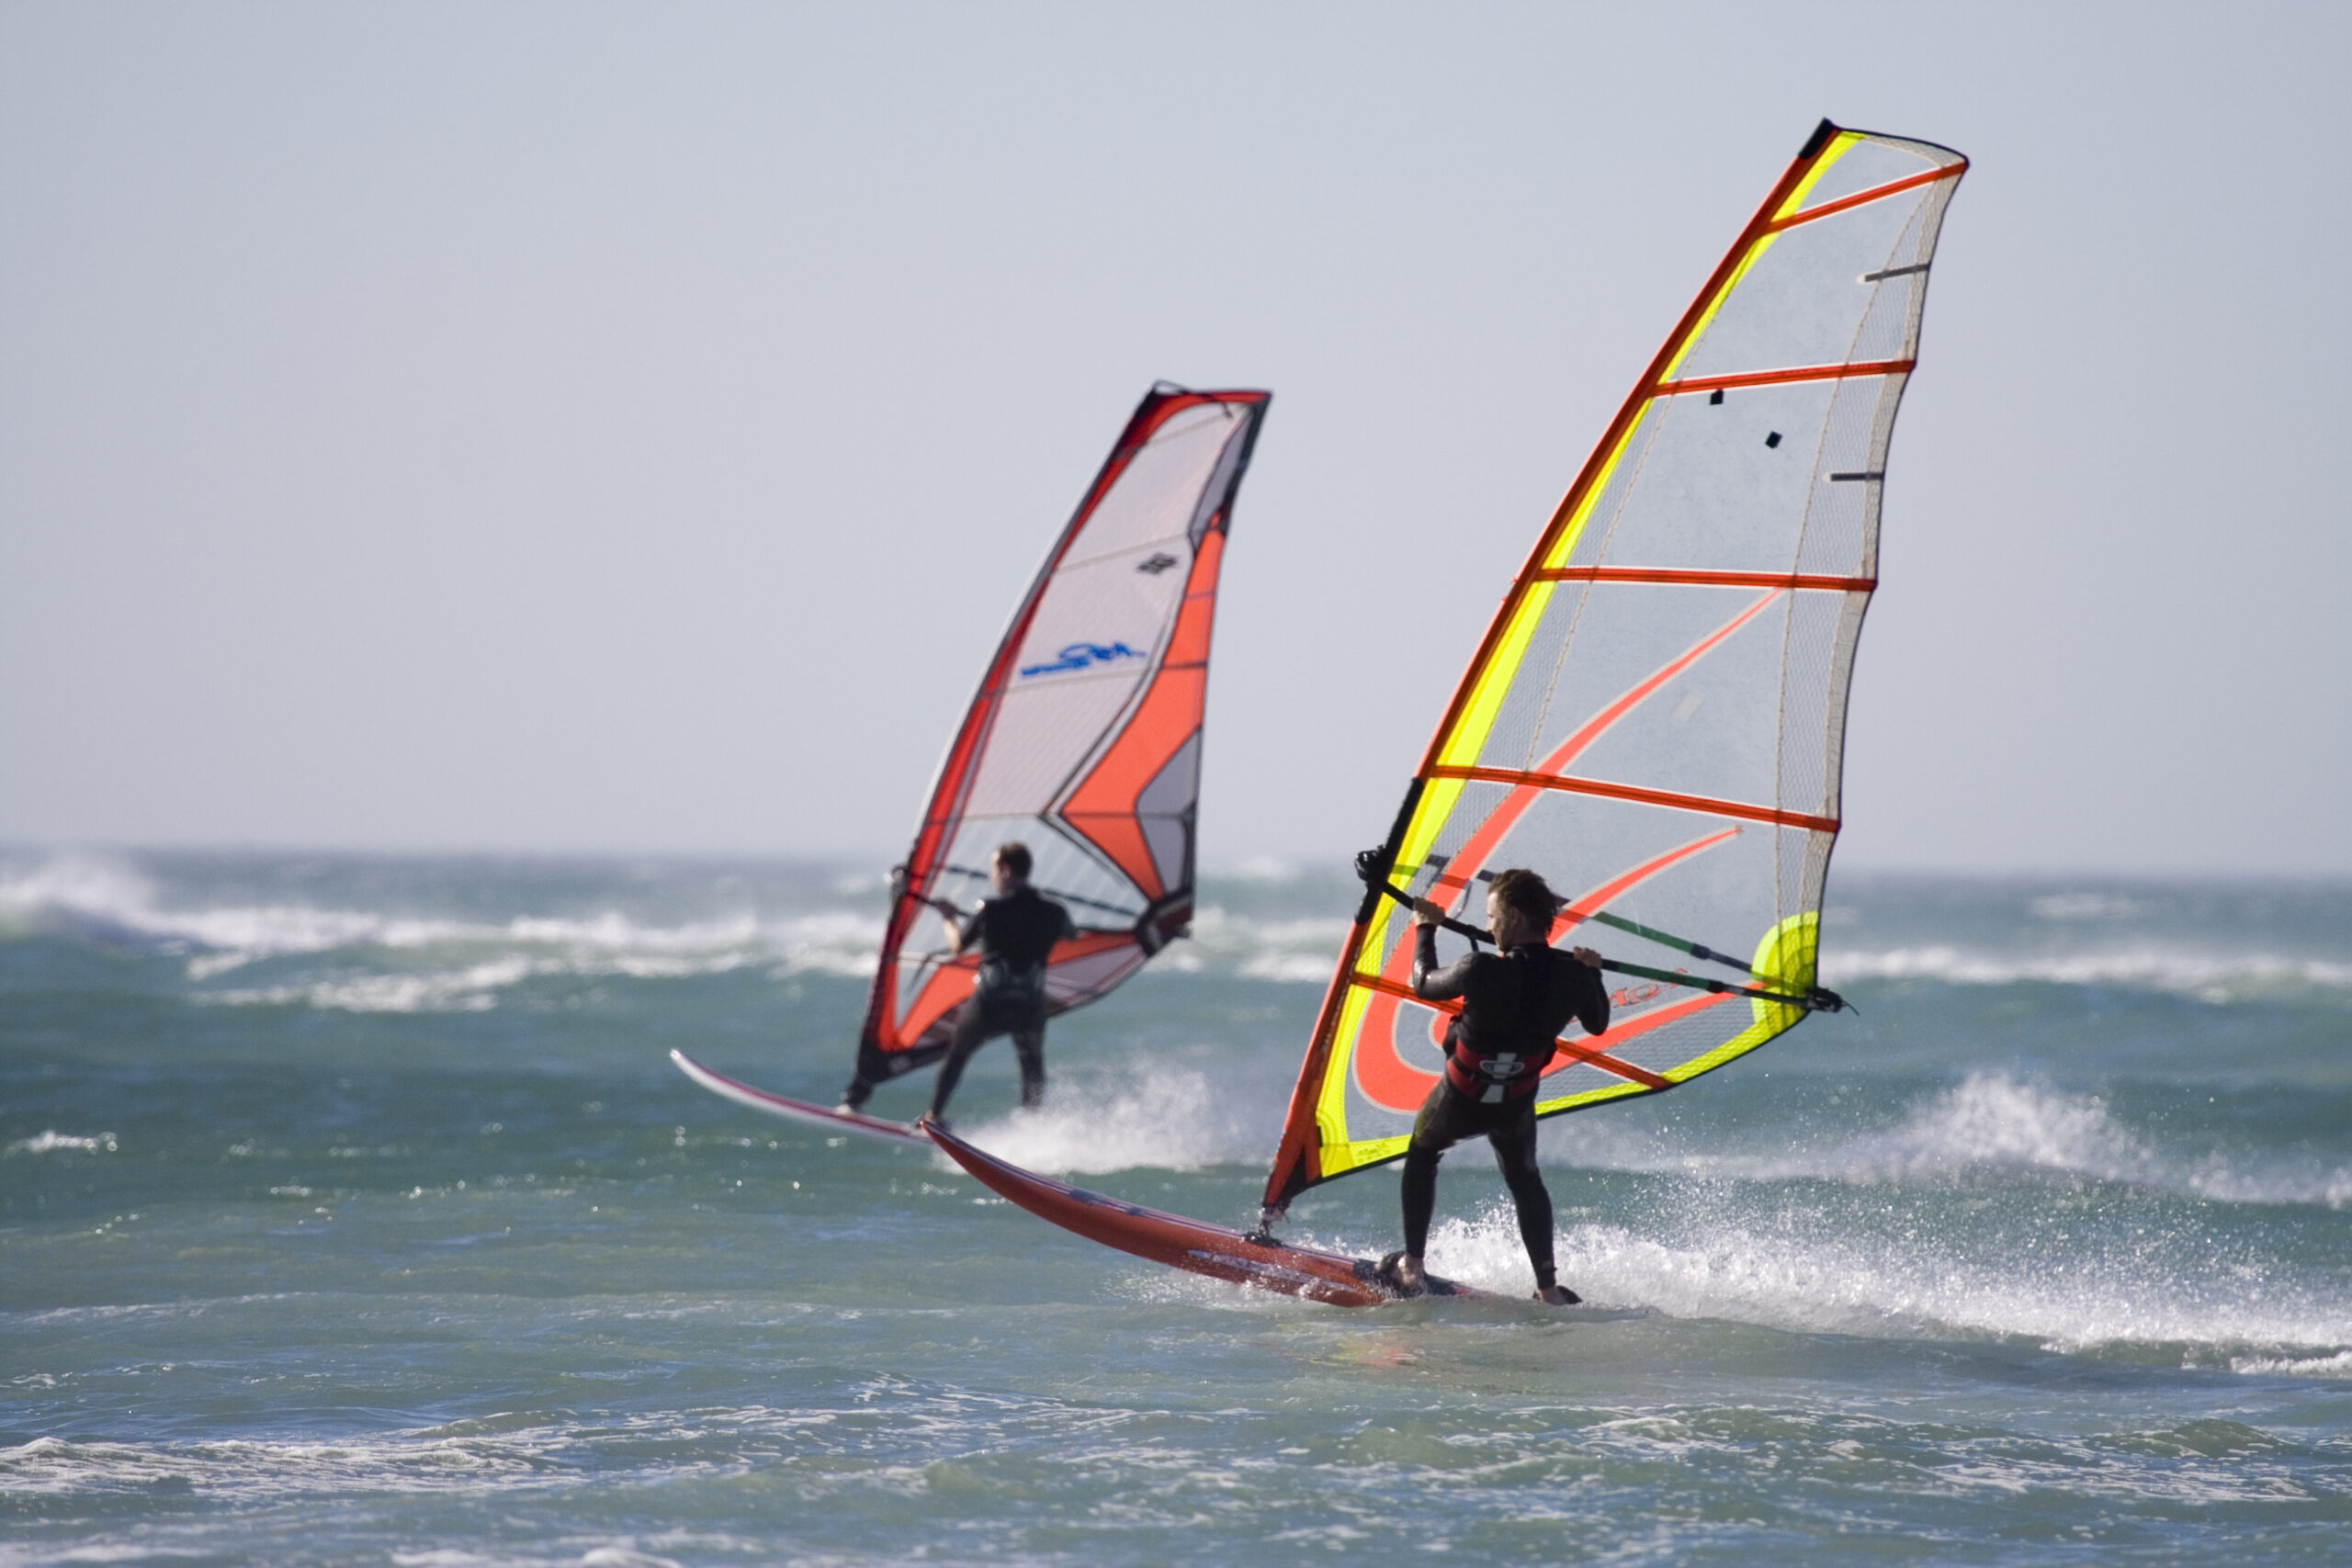 two-windsurfers-on-the-water-in-wetsuits